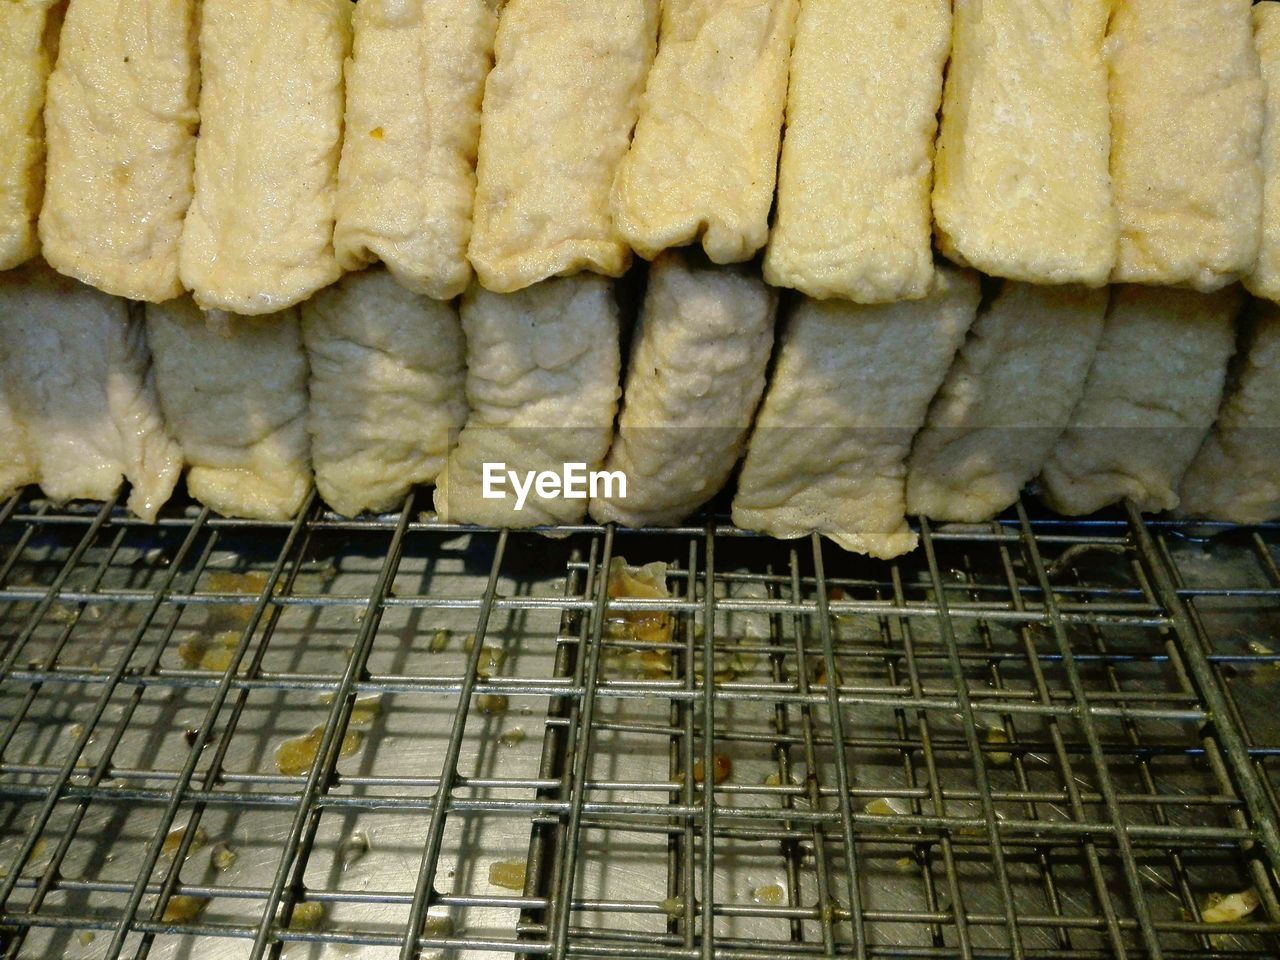 HIGH ANGLE VIEW OF BREAD IN TRAY